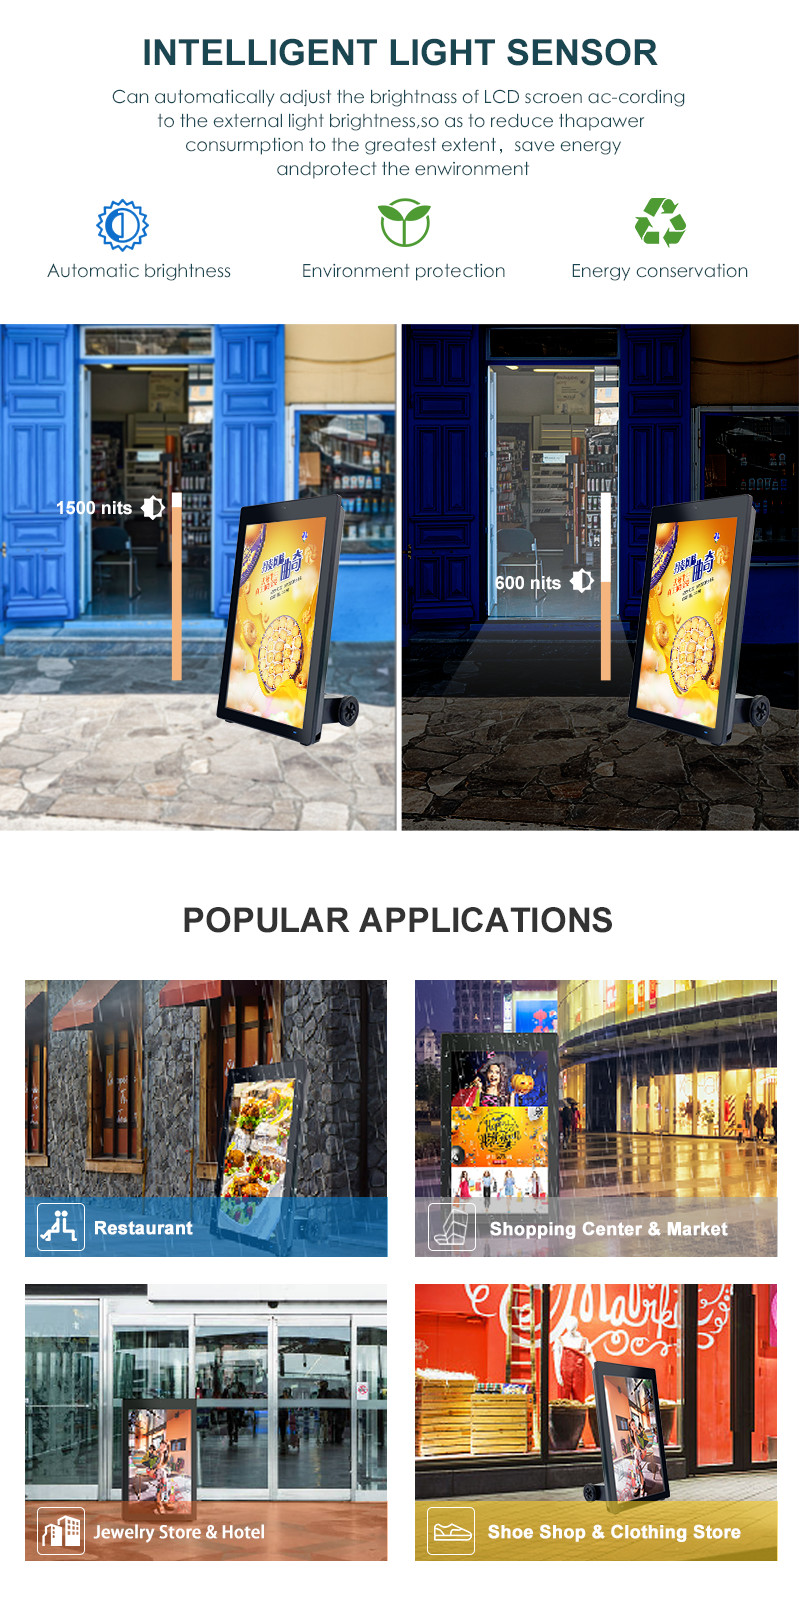 Outdoor capacitive touch lcd portable with wheels display advertising digital signage battery powered